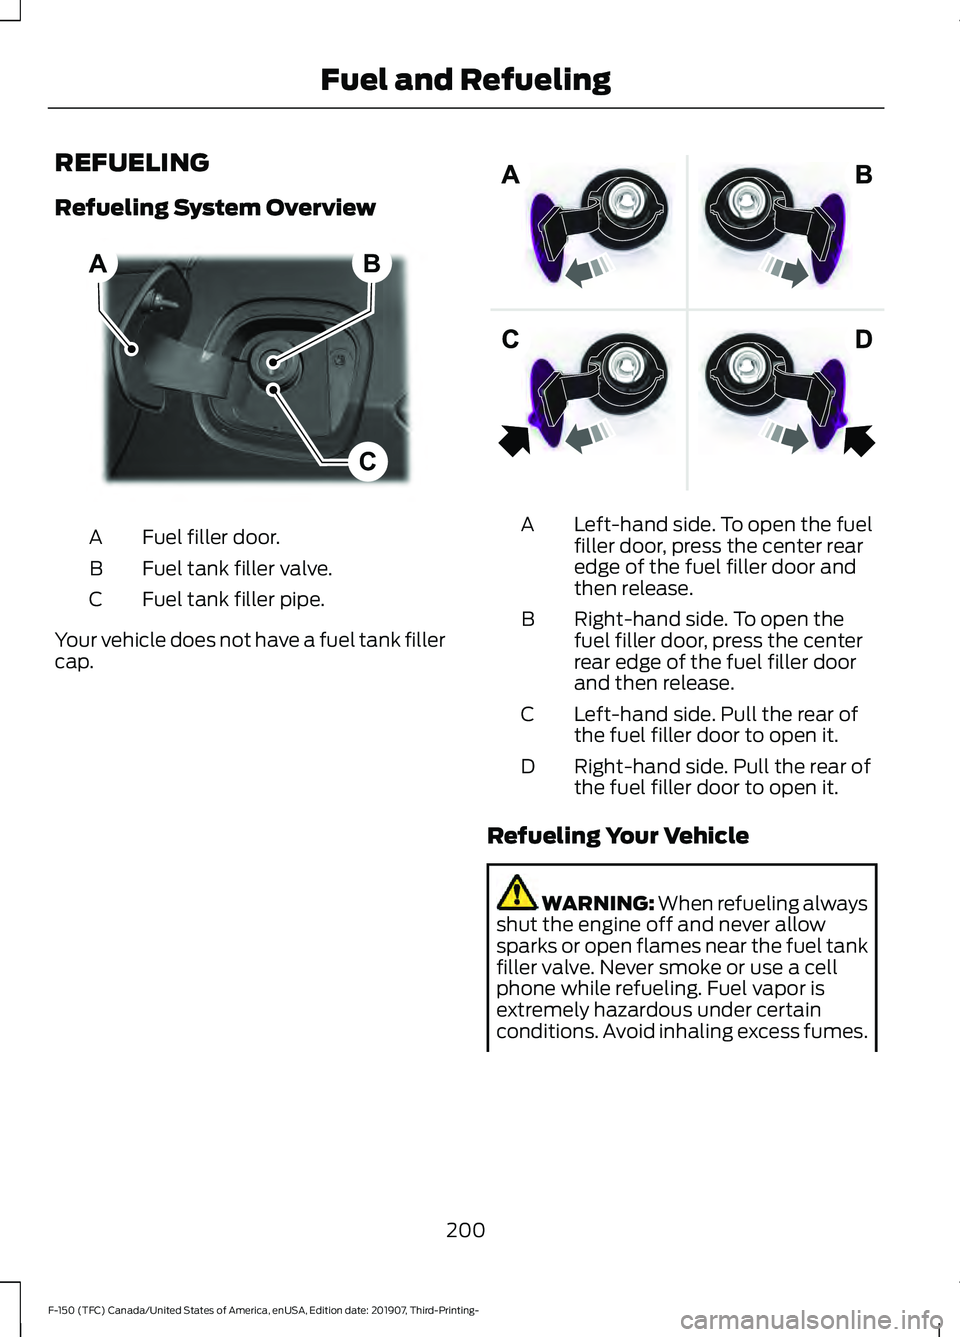 FORD F-150 2020  Owners Manual REFUELING
Refueling System Overview
Fuel filler door.
A
Fuel tank filler valve.
B
Fuel tank filler pipe.
C
Your vehicle does not have a fuel tank filler
cap. Left-hand side. To open the fuel
filler do